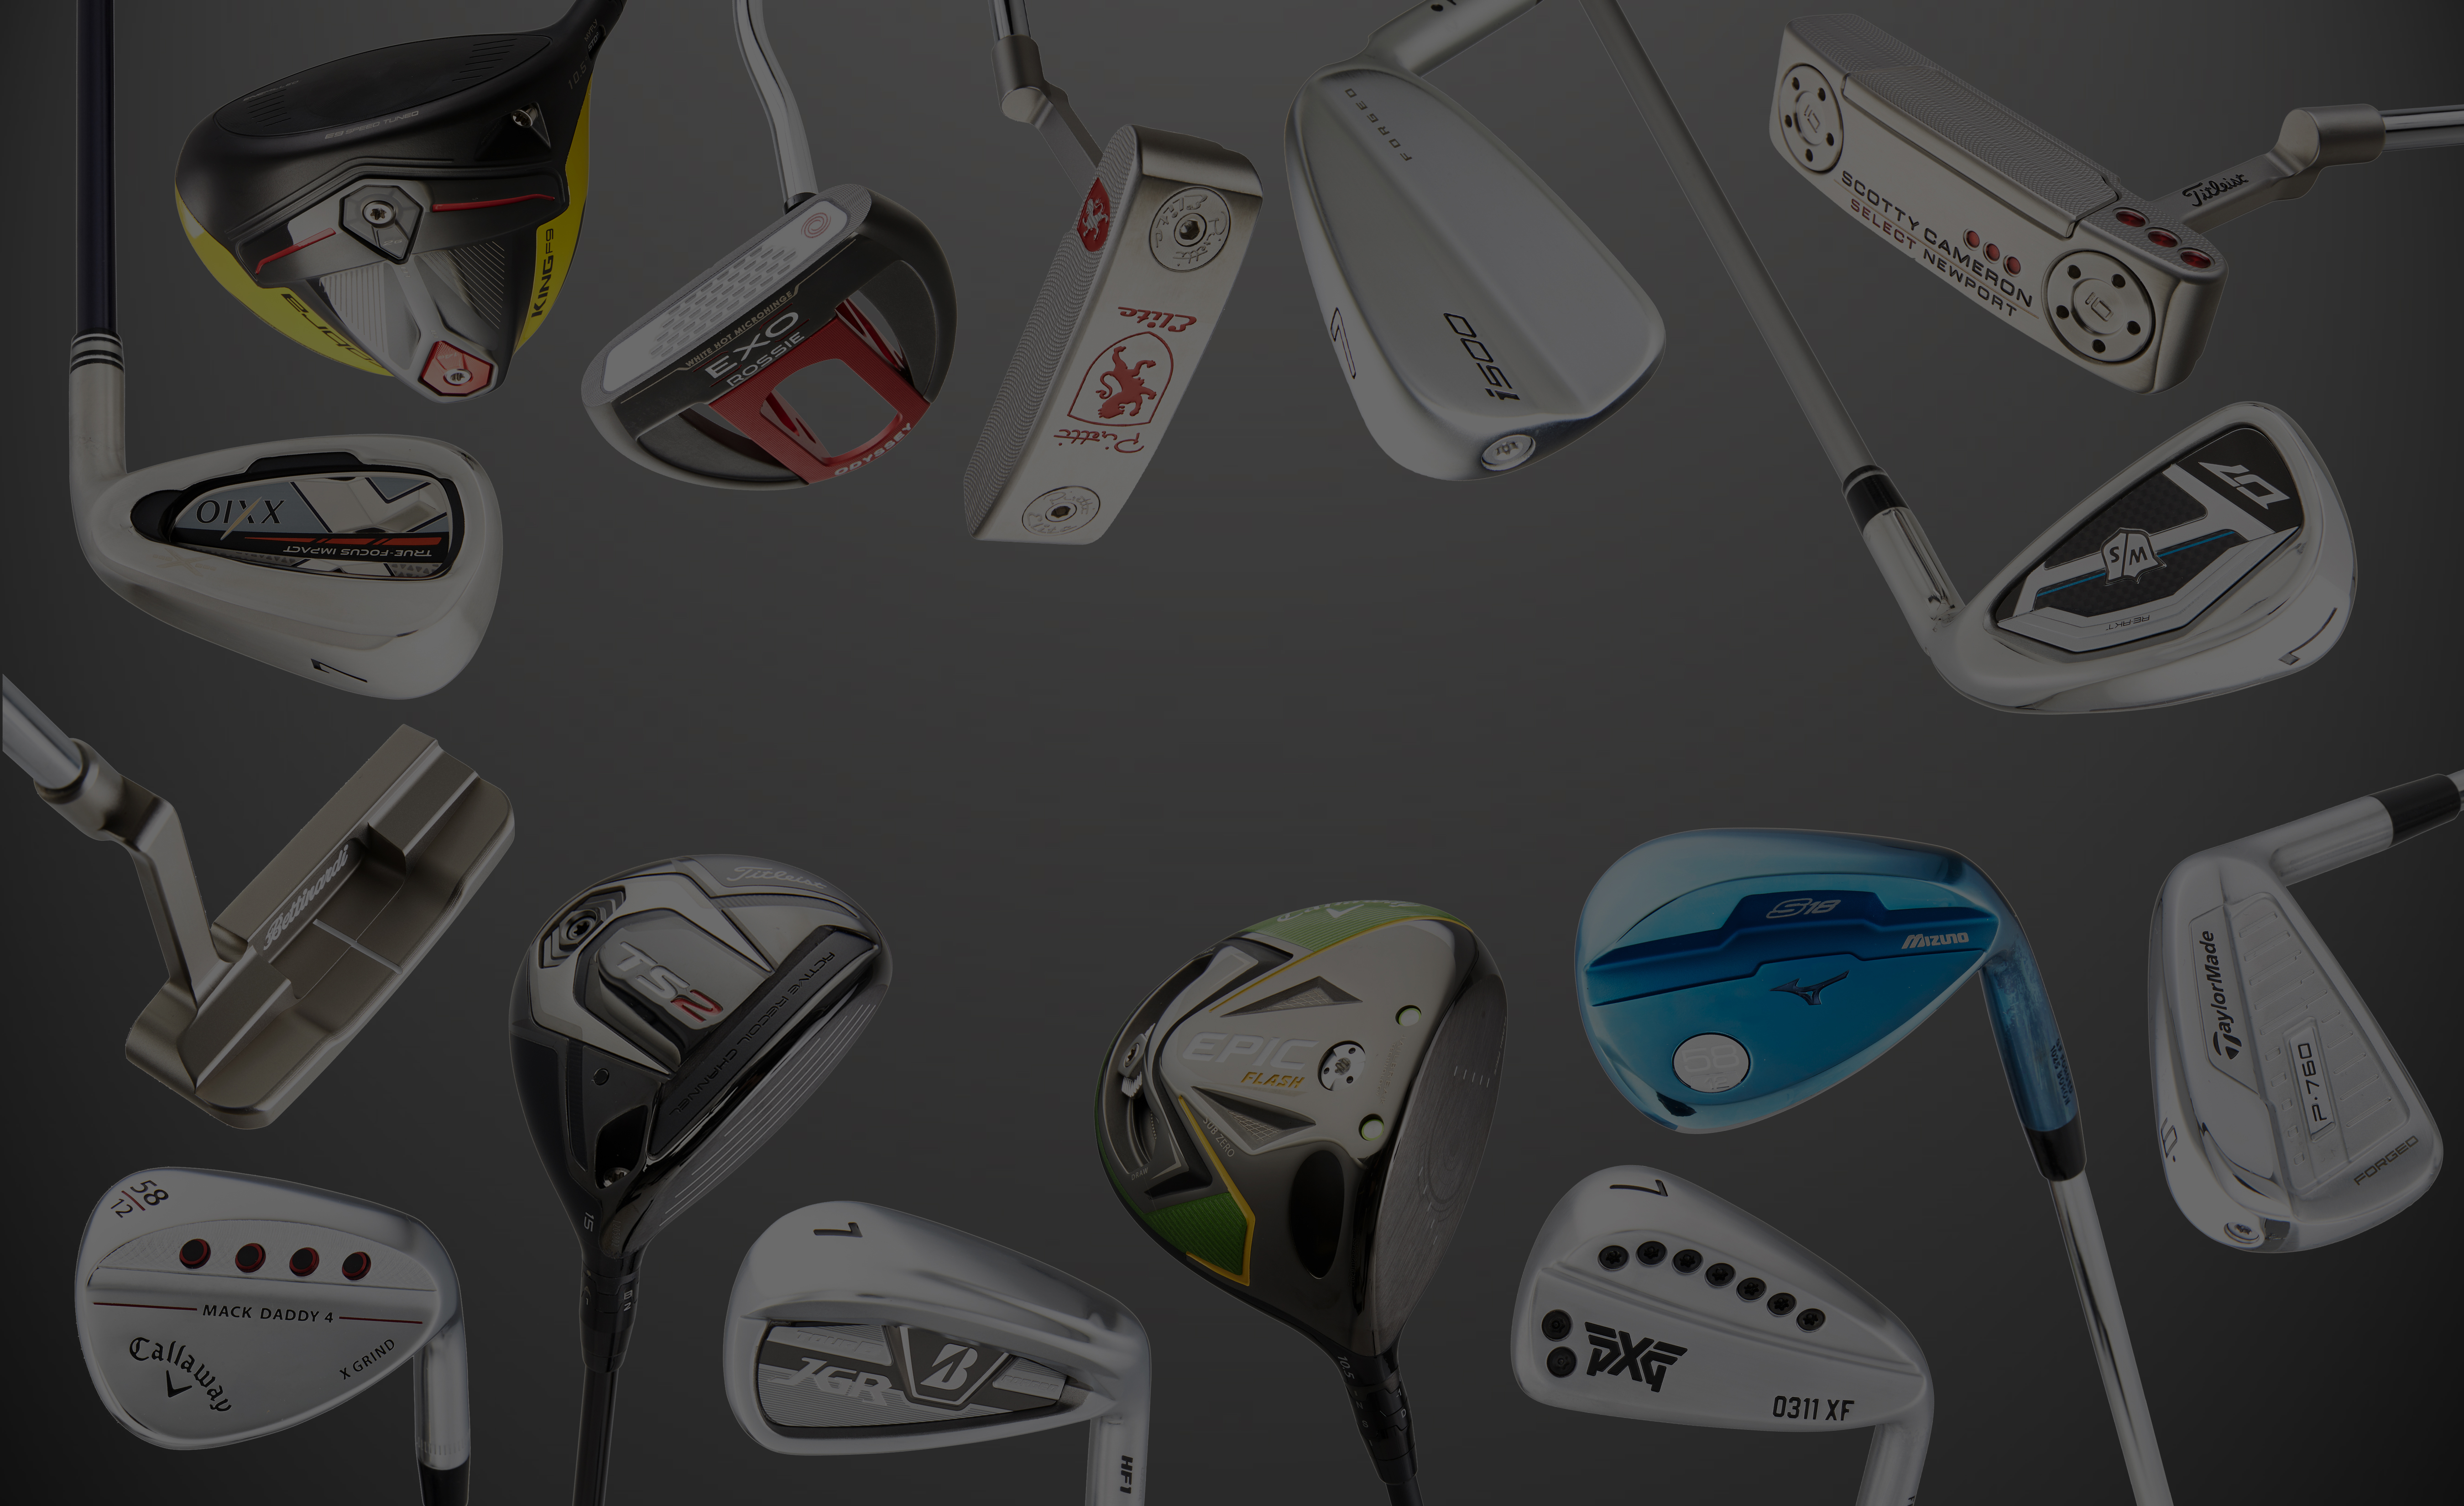 Golf Digest Hot List 2019: Announcing the 129 gold- and silver-medal winning, game-changing clubs worth your time Golf Equipment: Clubs, Balls, Bags Golf Digest